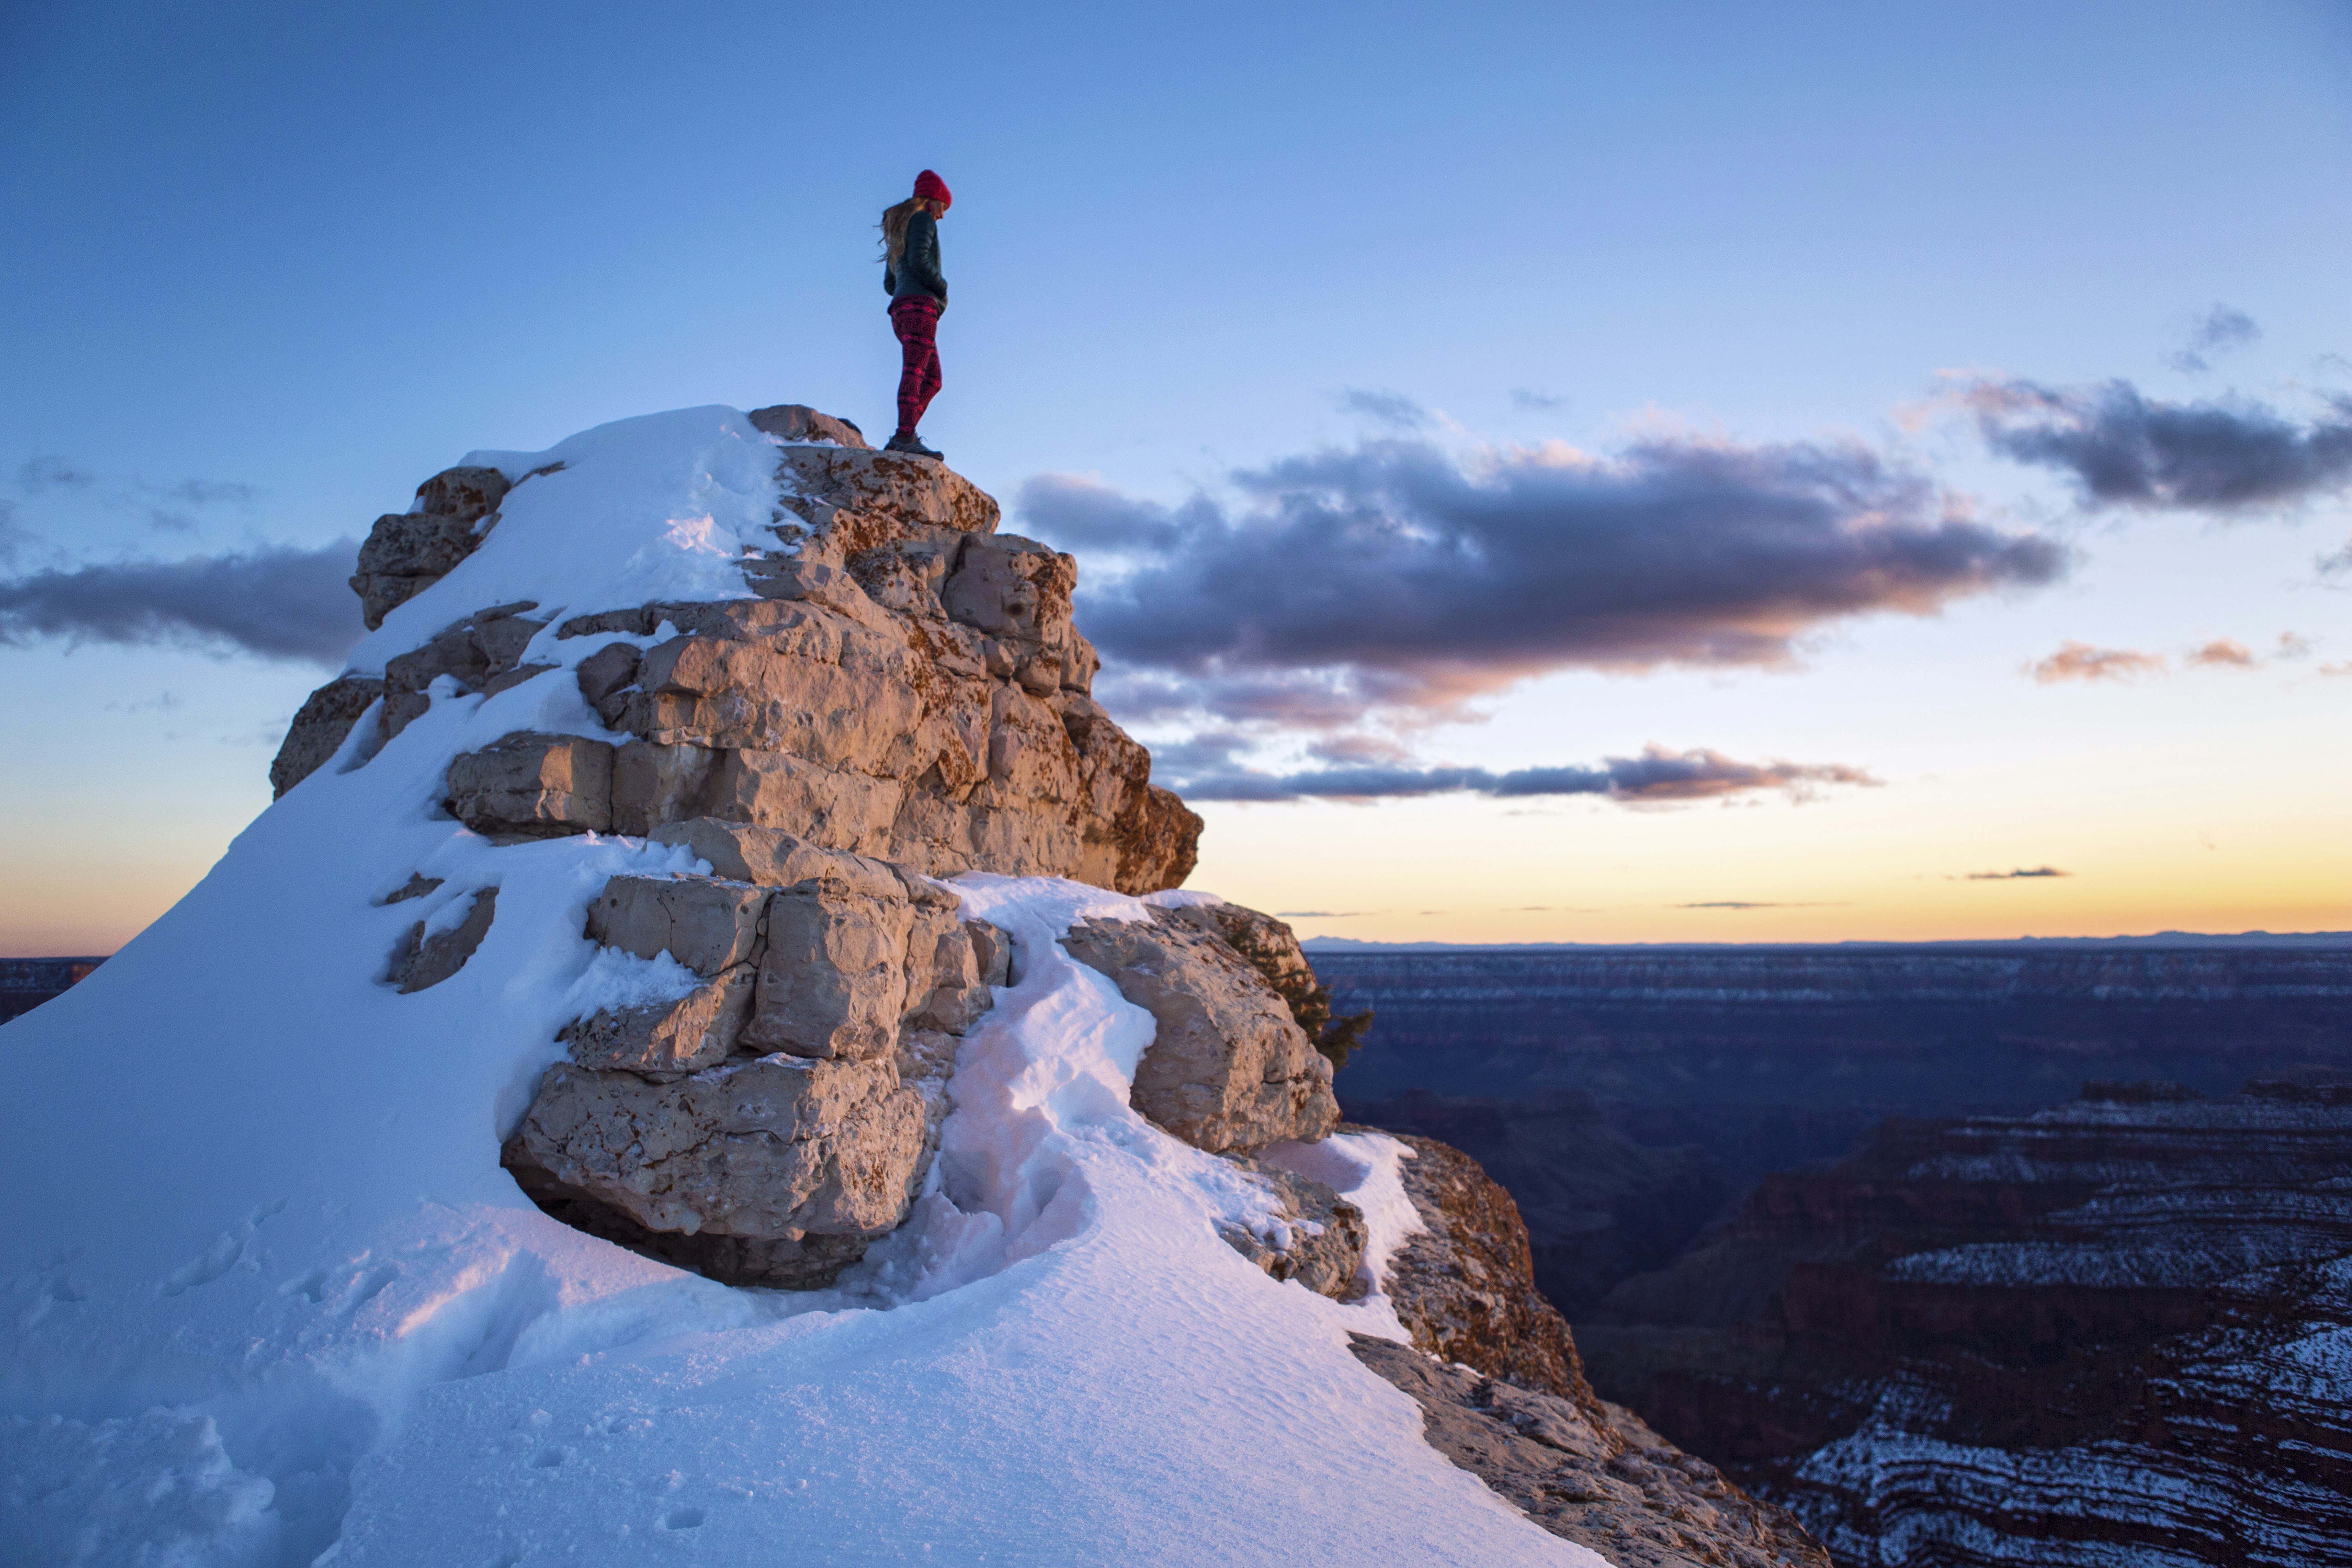 A fit, female hiker stands atop a snow-covered rocky high point while bathed in the colors of sunset at the North Rim of the Grand Canyon, Grand Canyon National Park, Arizona, USA